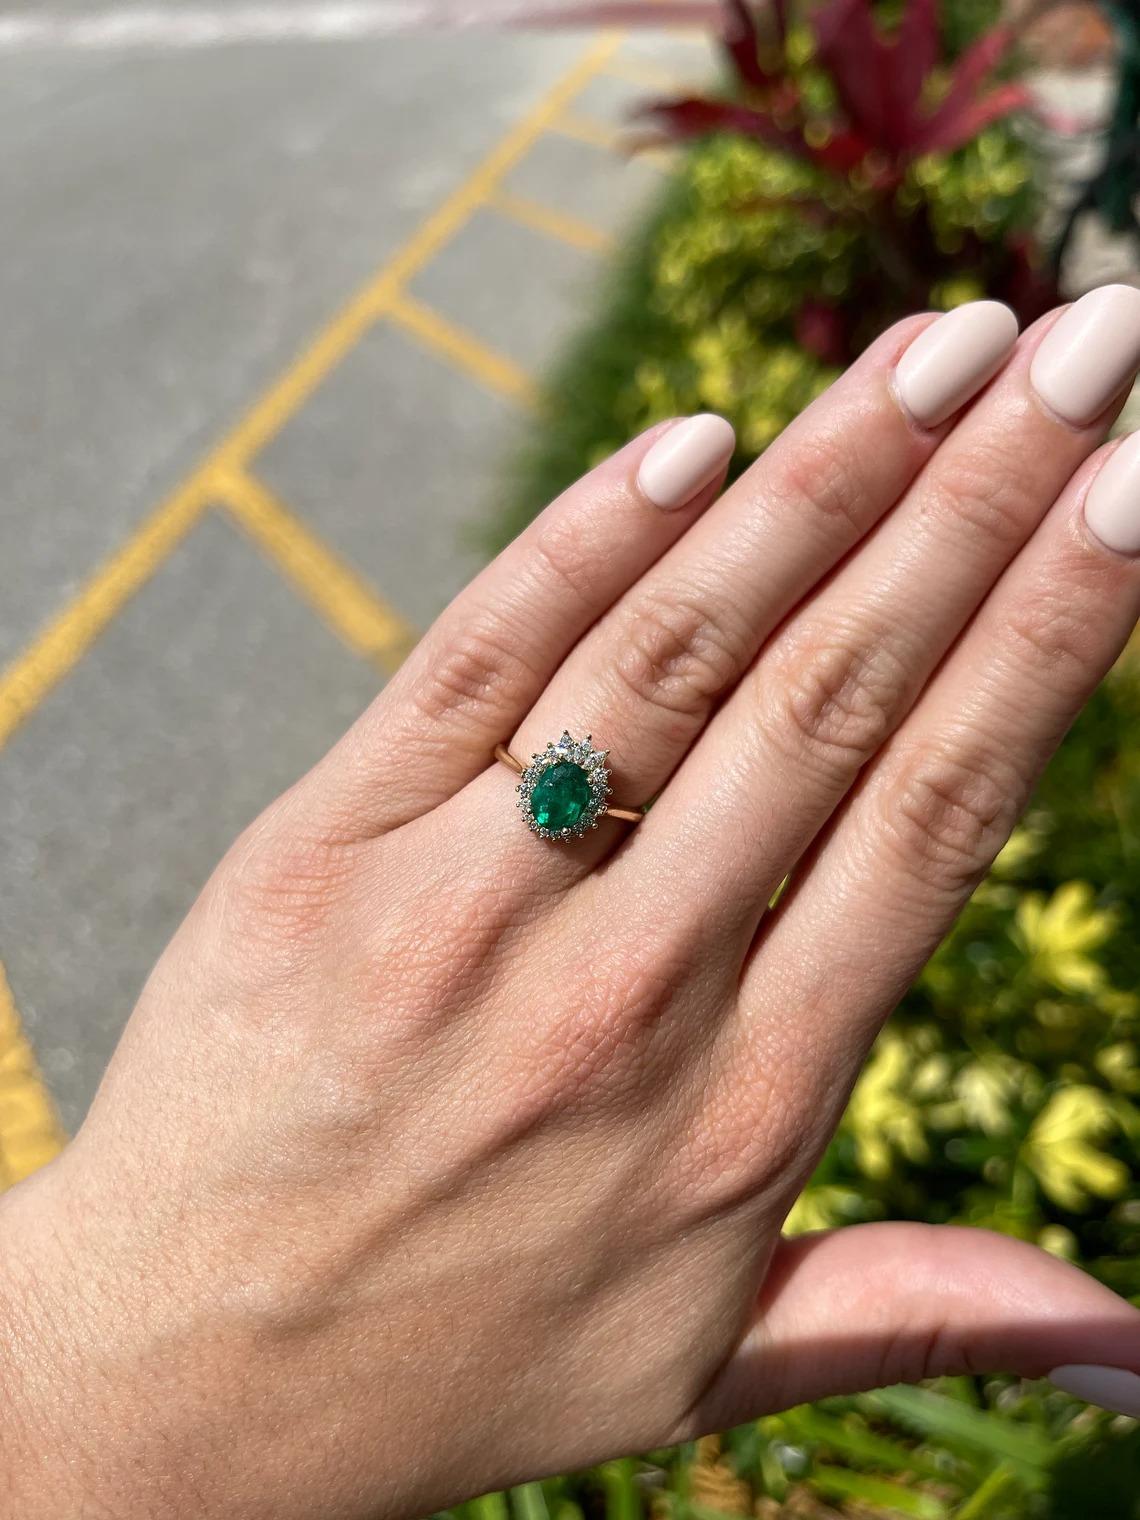 This is an exquisite, Colombian emerald and diamond tiara halo ring. The gorgeous setting lets sit a vivacious Colombian emerald with a rich dark green color and very good eye clarity. The emerald is not perfect and small imperfections do exist as